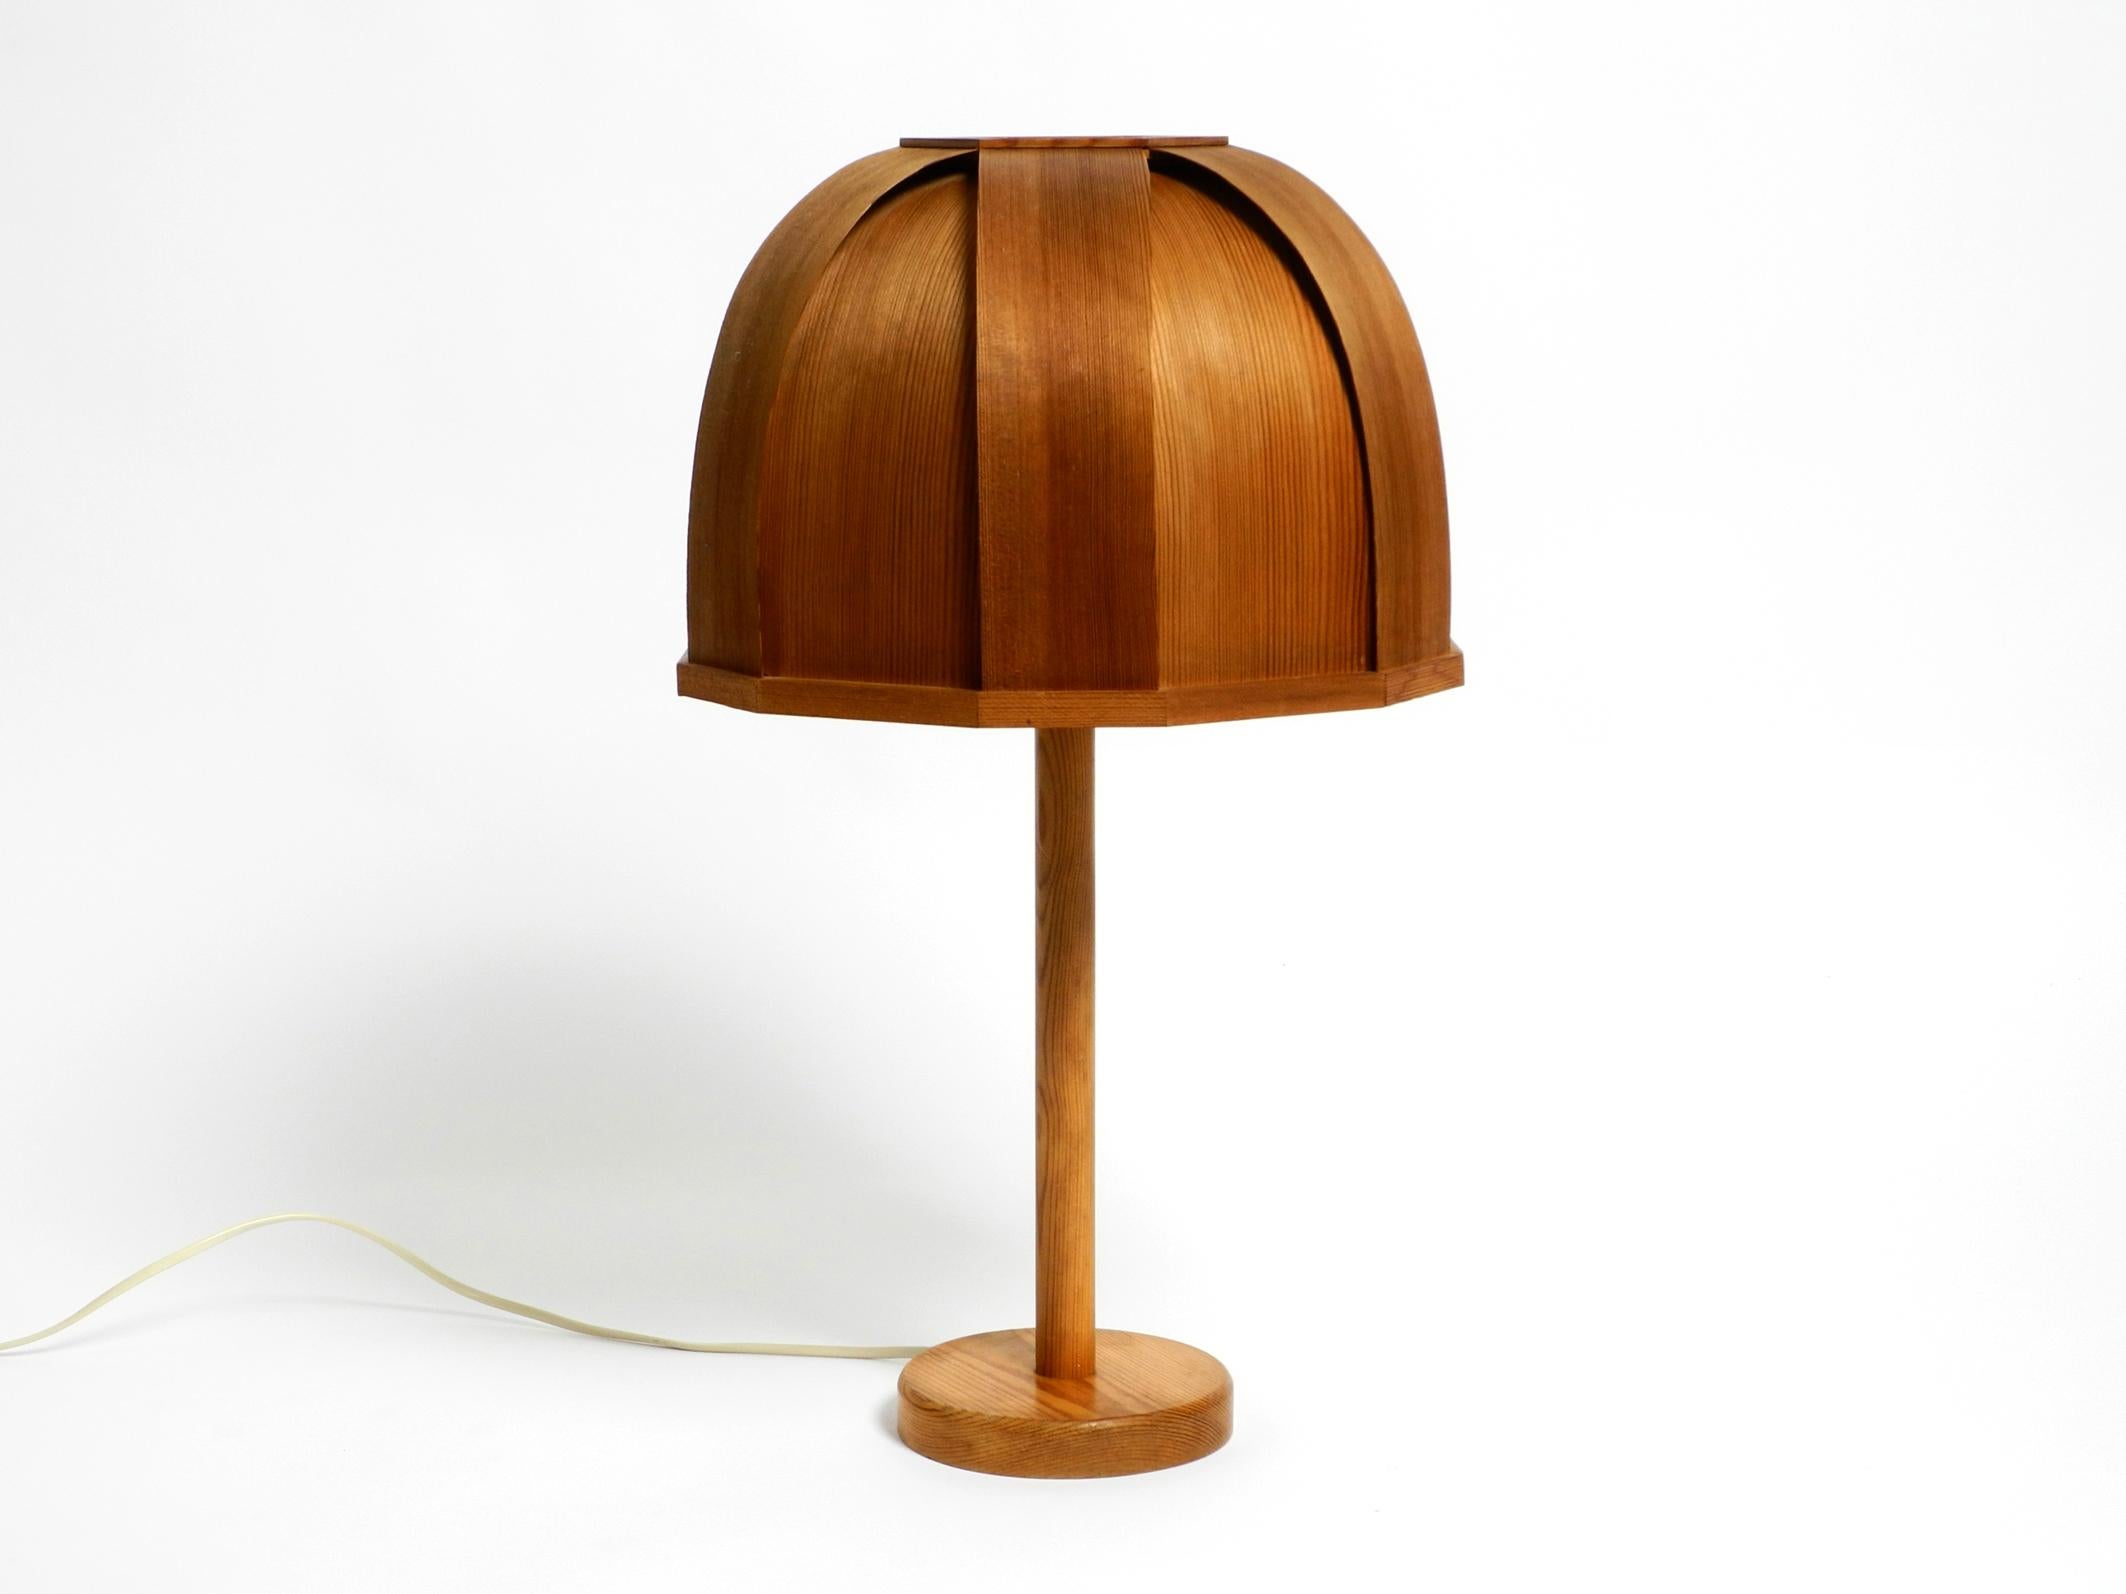 Very rare 1970s pine veneer table lamp with bentwood slats.
Manufacturer is GB Solbackens Svarveri. Made in Sweden.
Beautiful swedish classic from the 1970s.
Very good vintage condition and fully functional.
No damage to the entire lamp. No cracks